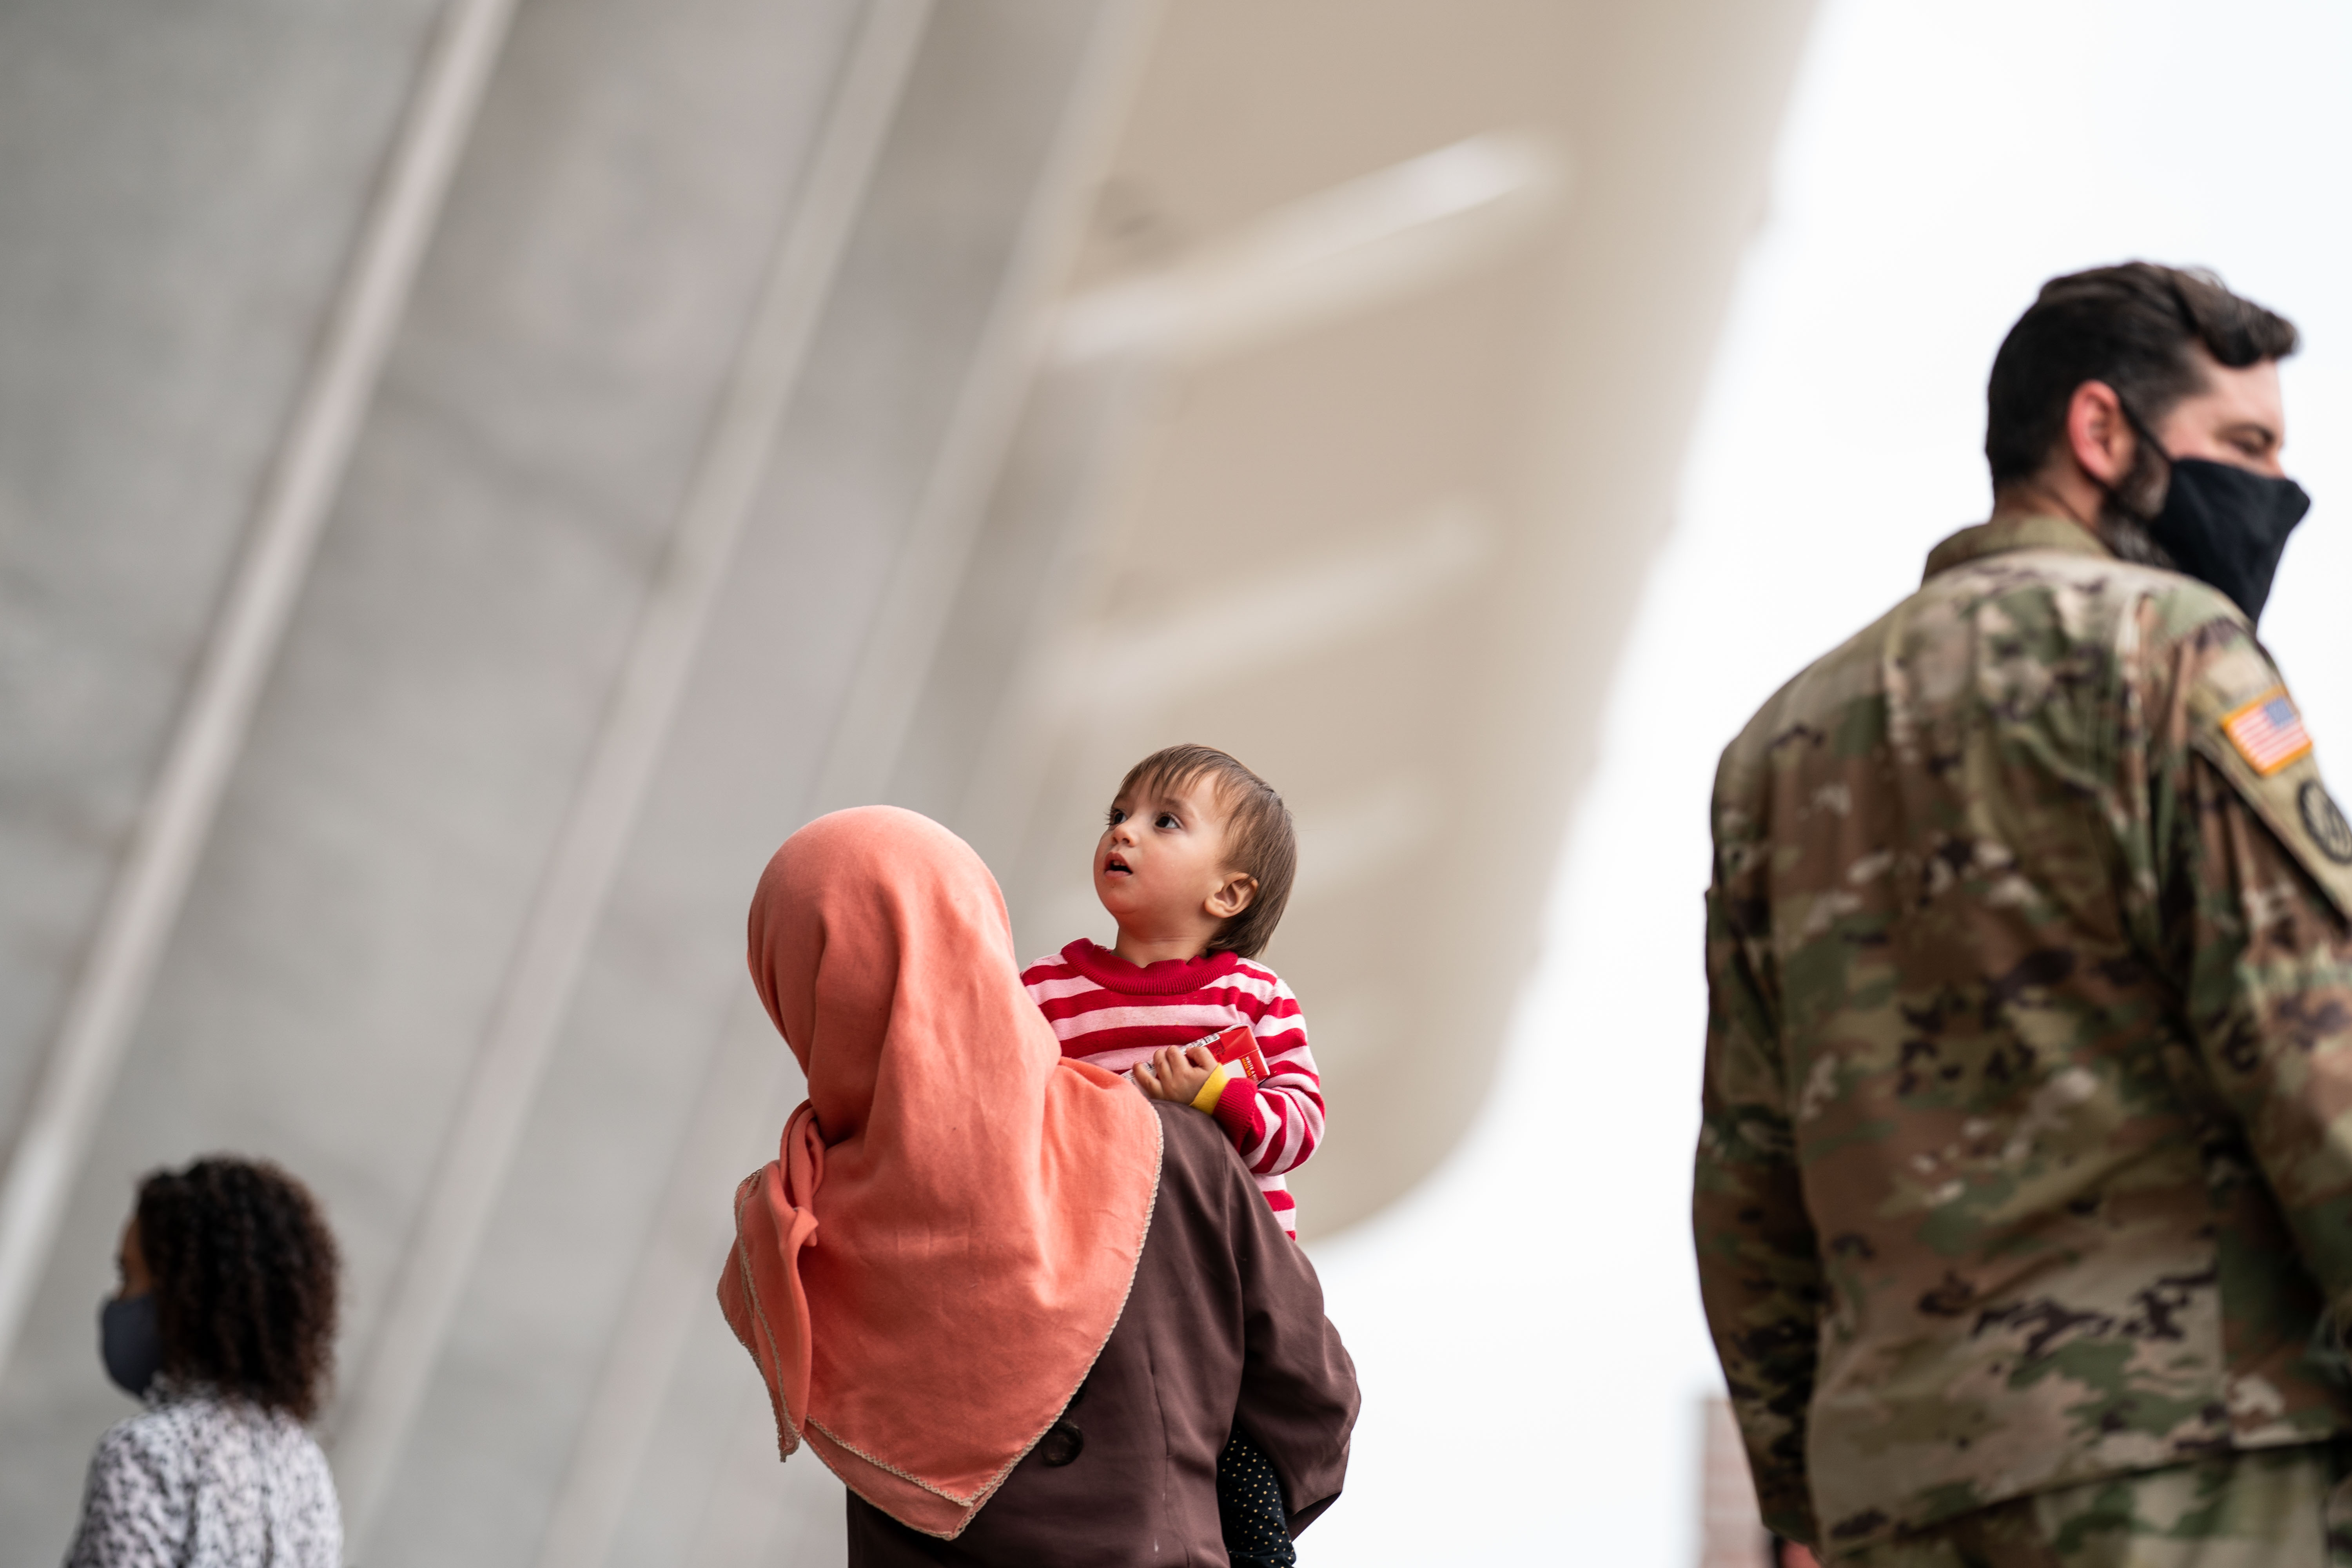 A person in a headscarf carries a small child past a soldier wearing camouflage.